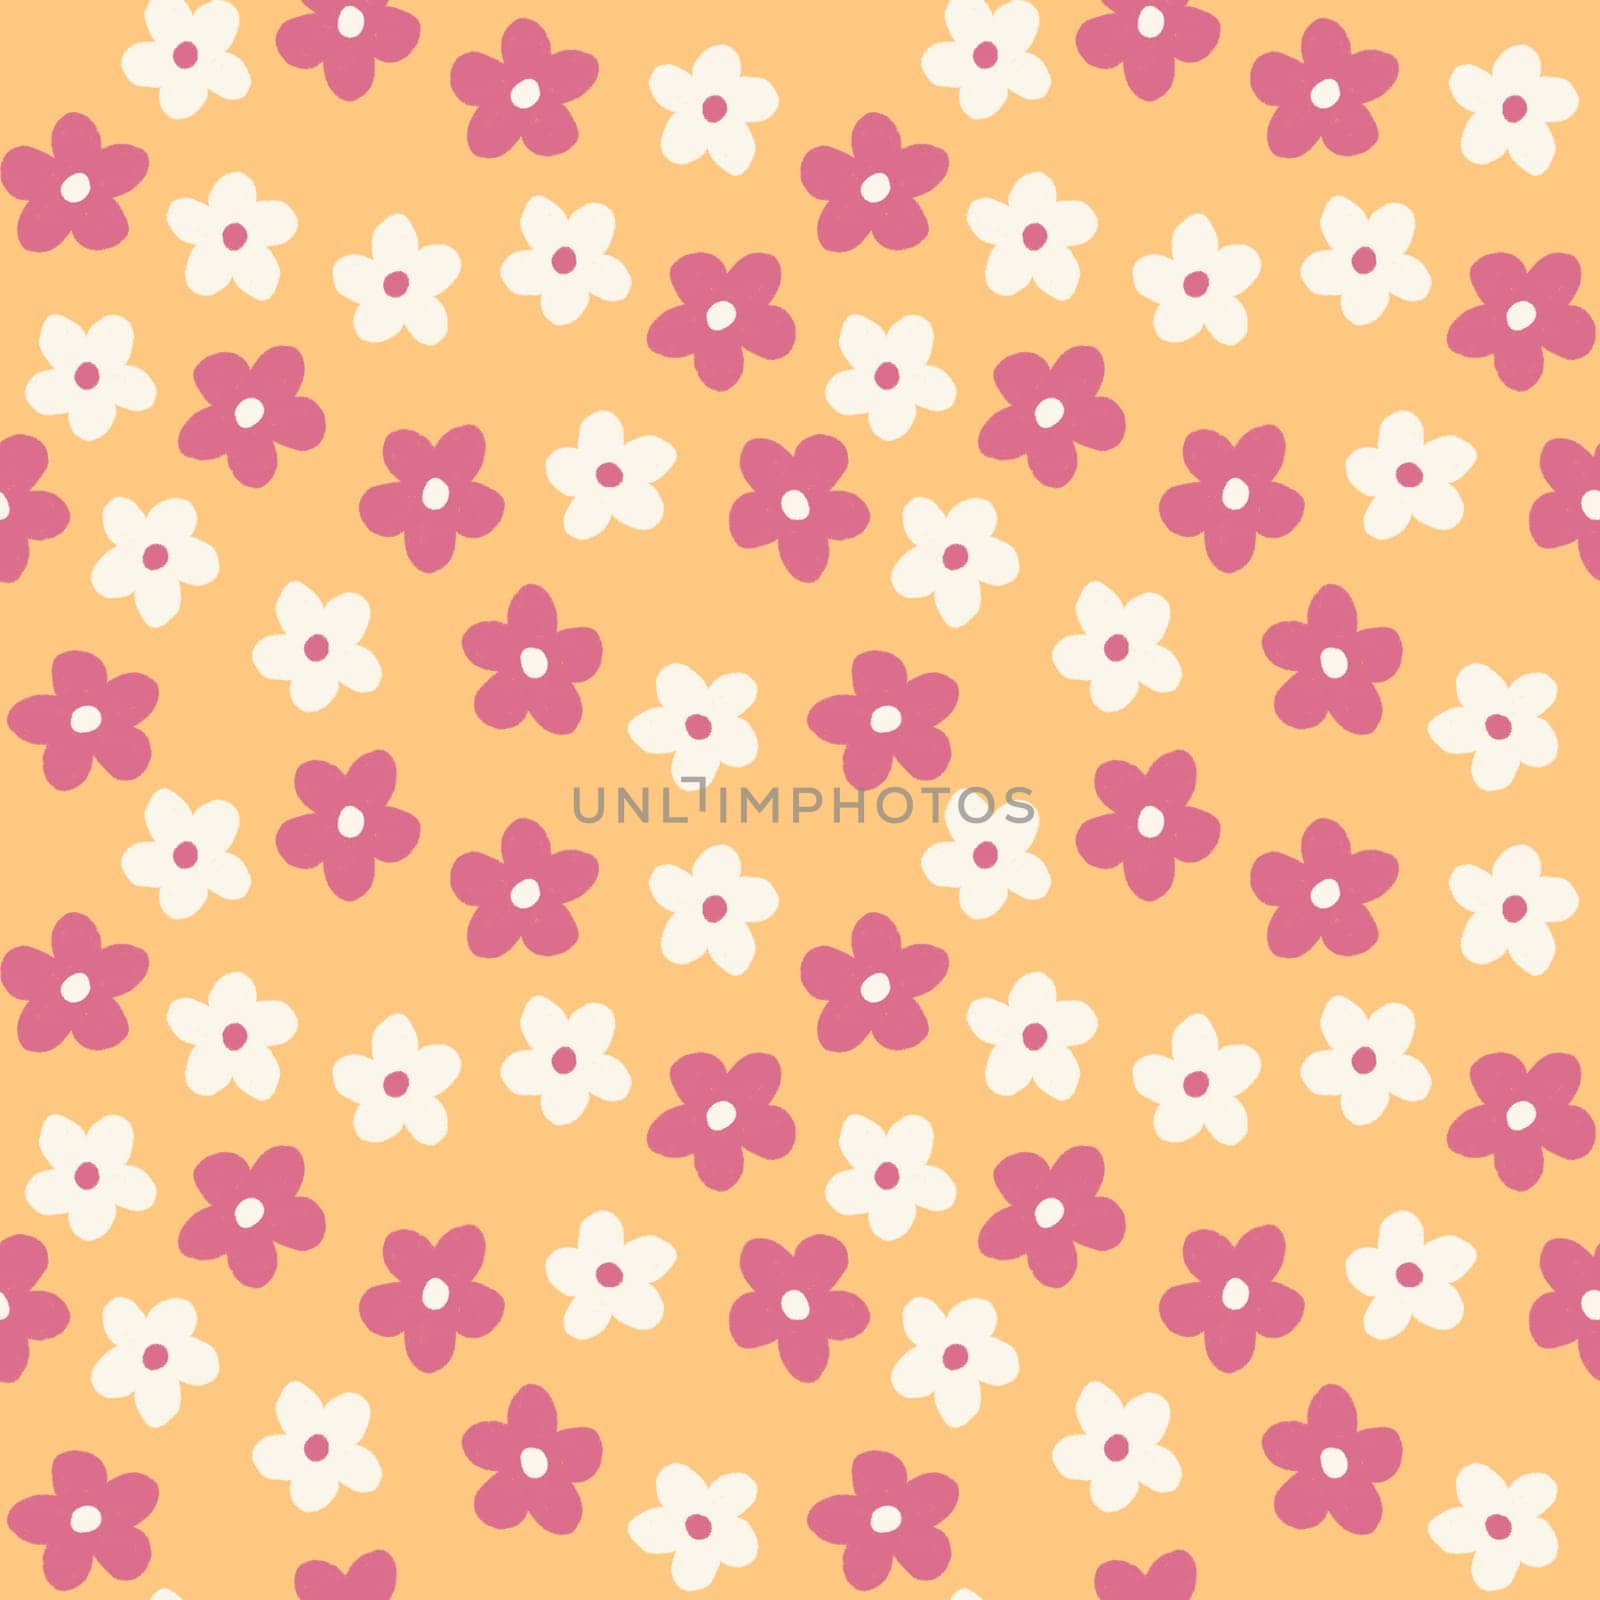 Hand drawn seamless pattern with floral flowers. Peach fuzz apricot orange ornament, simple retro pastel garden print with vintage ditsy elements. Color of the year design, trendy fabric background